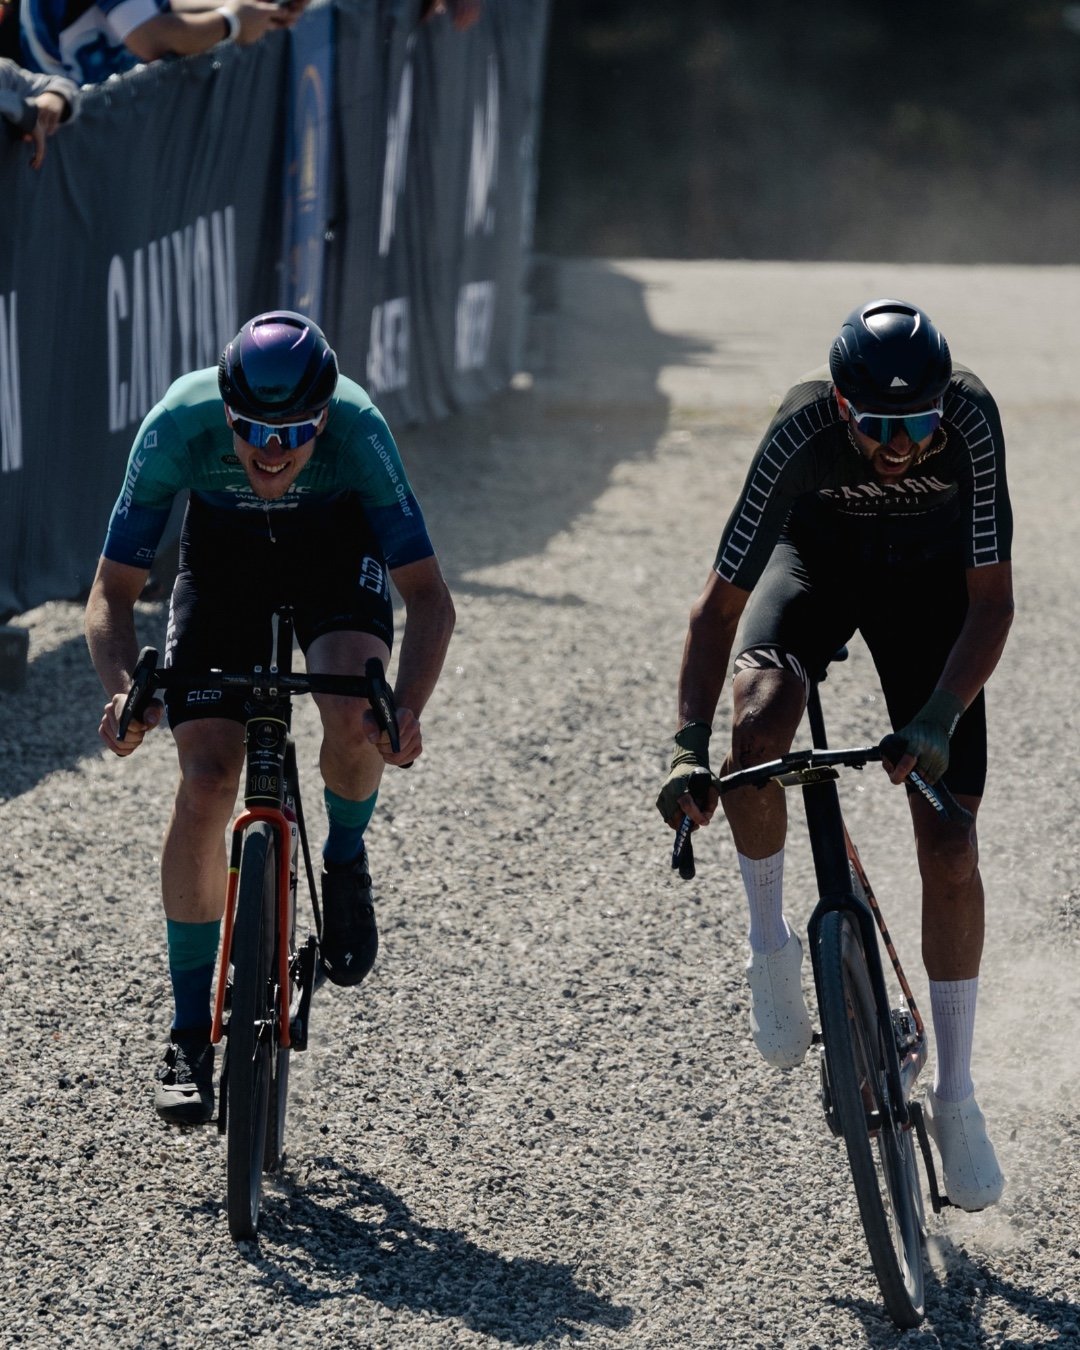 You don't have to be a Pro to enjoy FNLD GRVL, but a &euro;20k prize purse for the Midnight Sun Course might just motivate you to start training a little harder 🚴&zwj;♂️💨

#fnldgrvl #finlandgravel #gravelrace #europegravel #nordicgravel #gravelpro